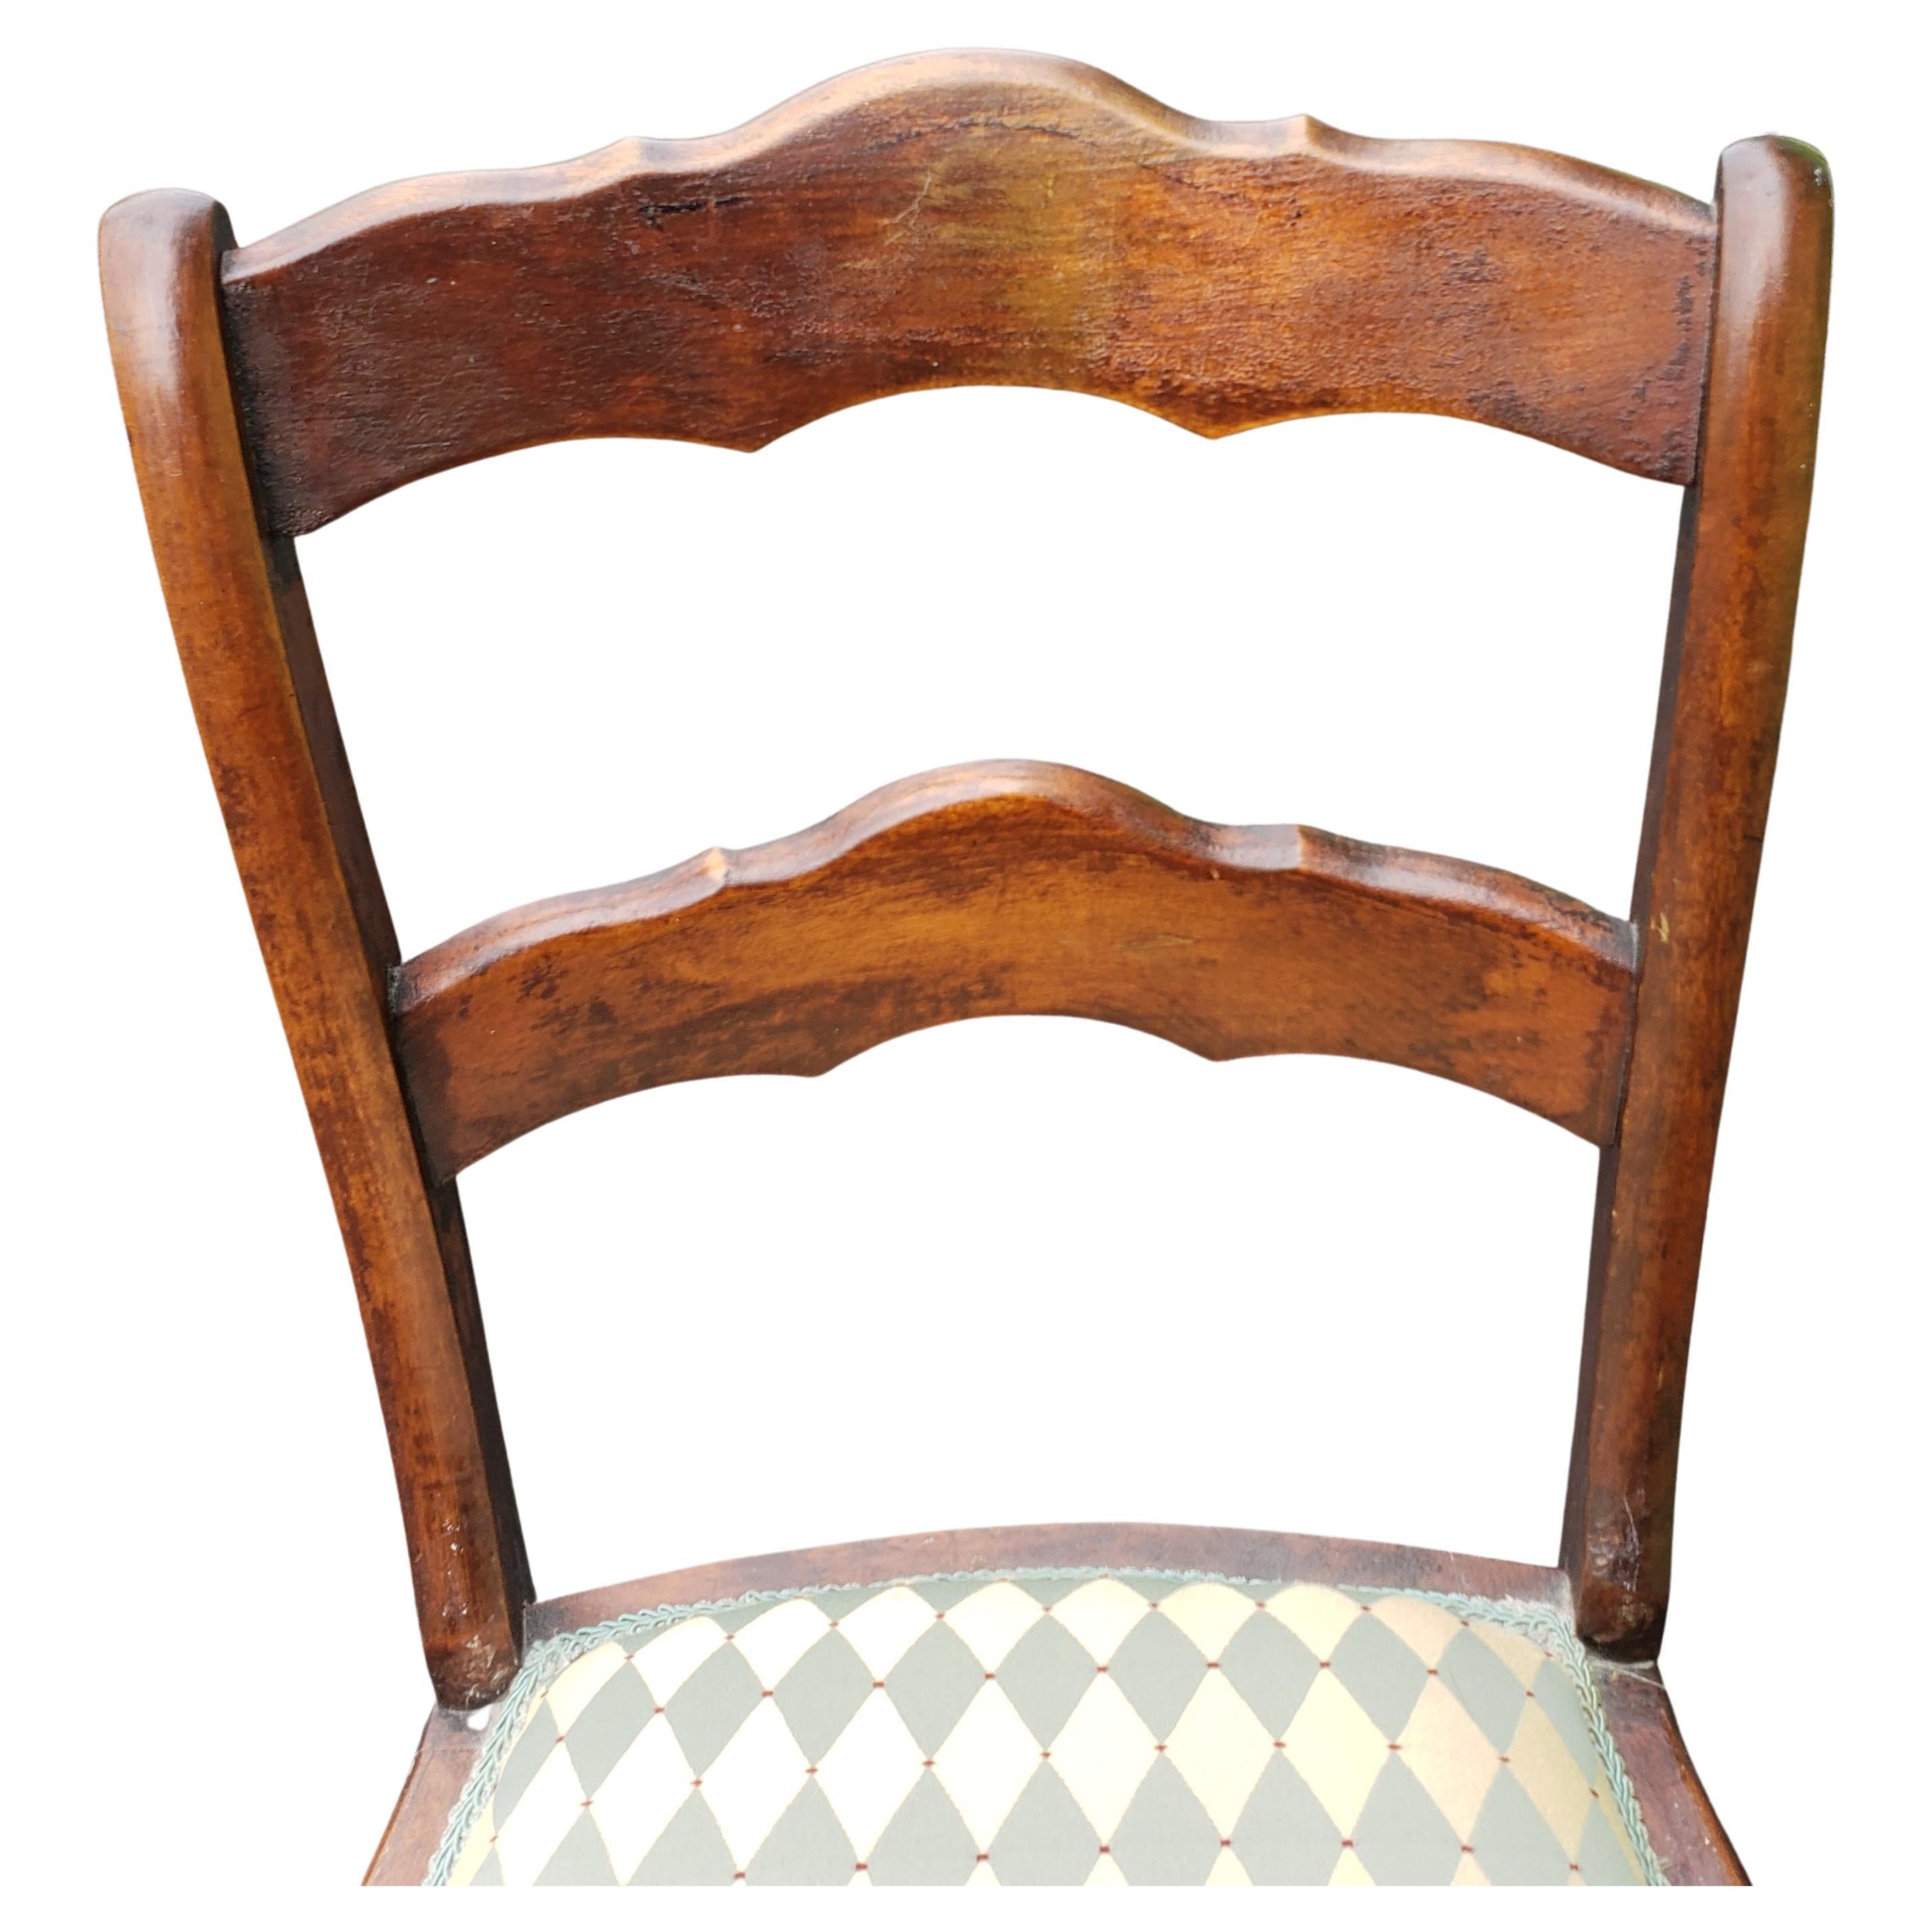 Woodwork Ladder Back Victorian Reupholstered Mahogany Side Chair, Circa 1860s For Sale